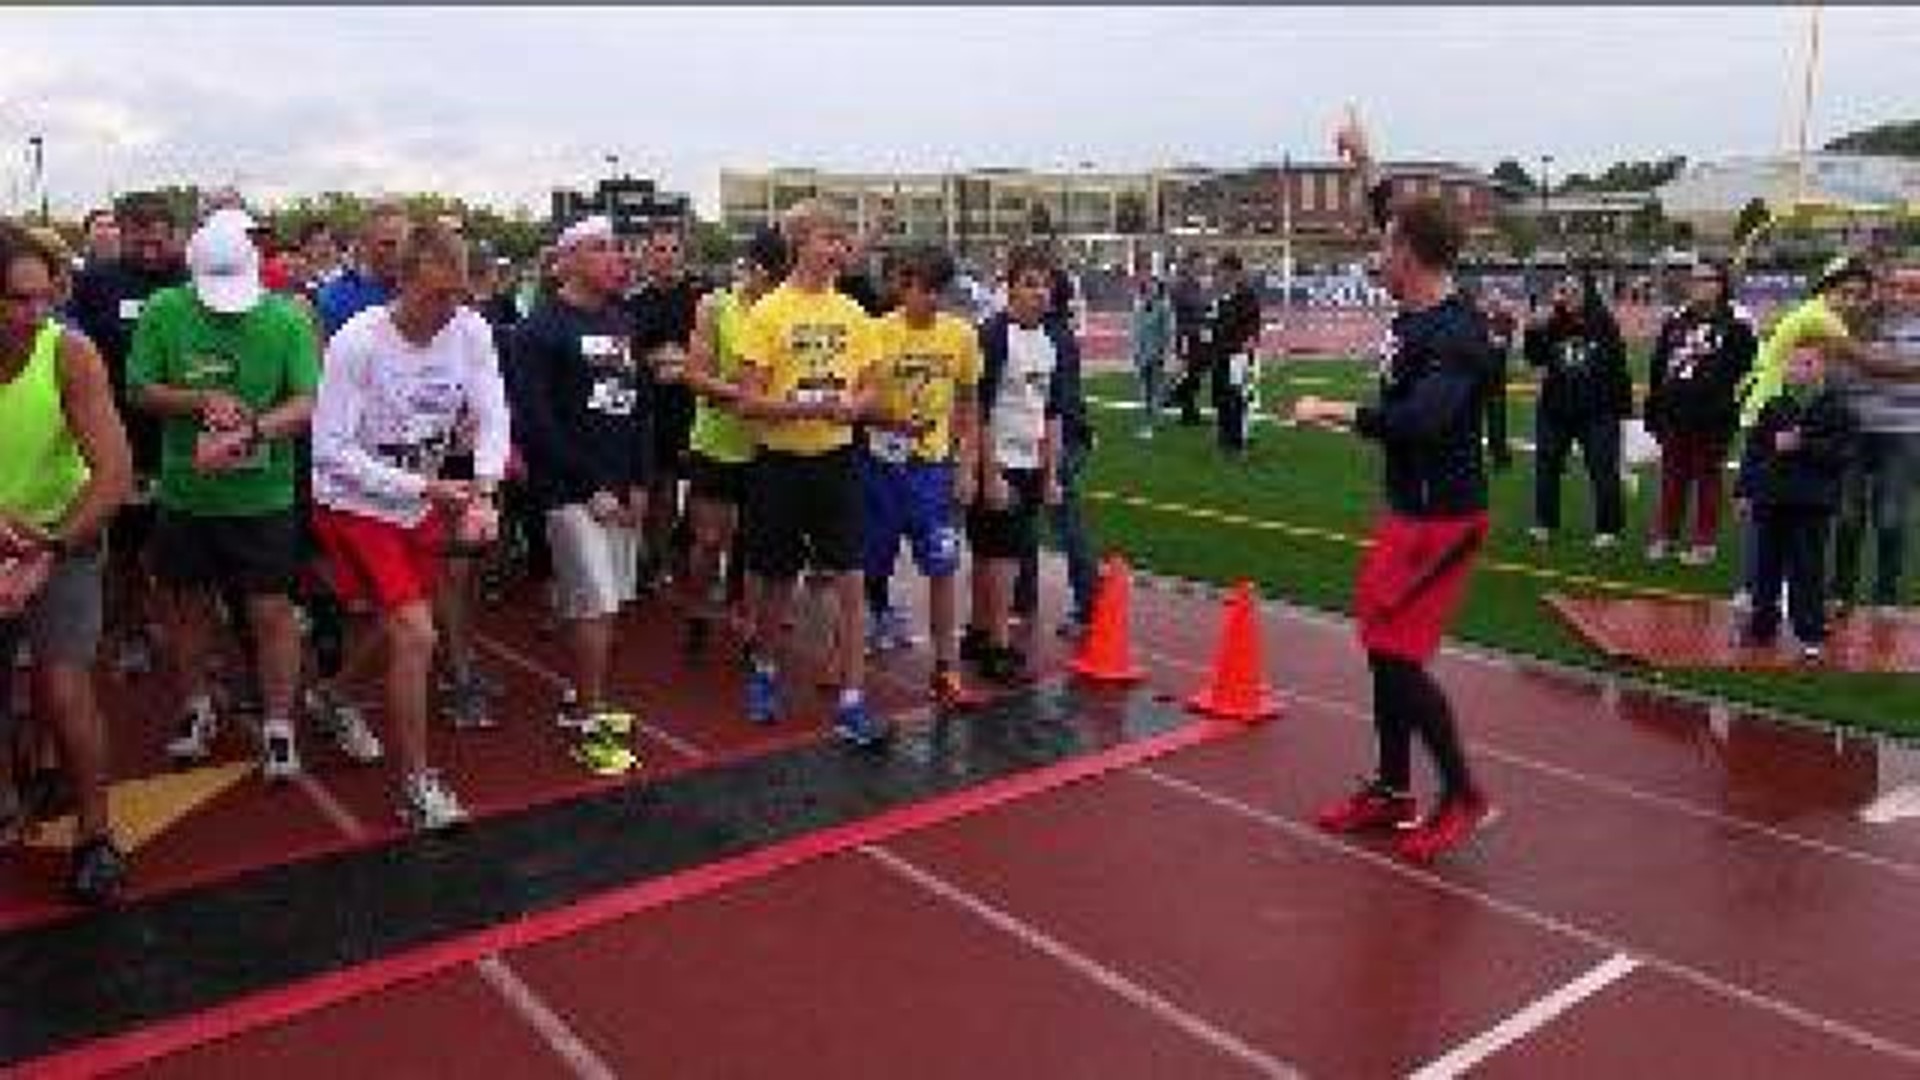 Hundreds Turn Out For Ryan's Run 5K/All Abilities Walk